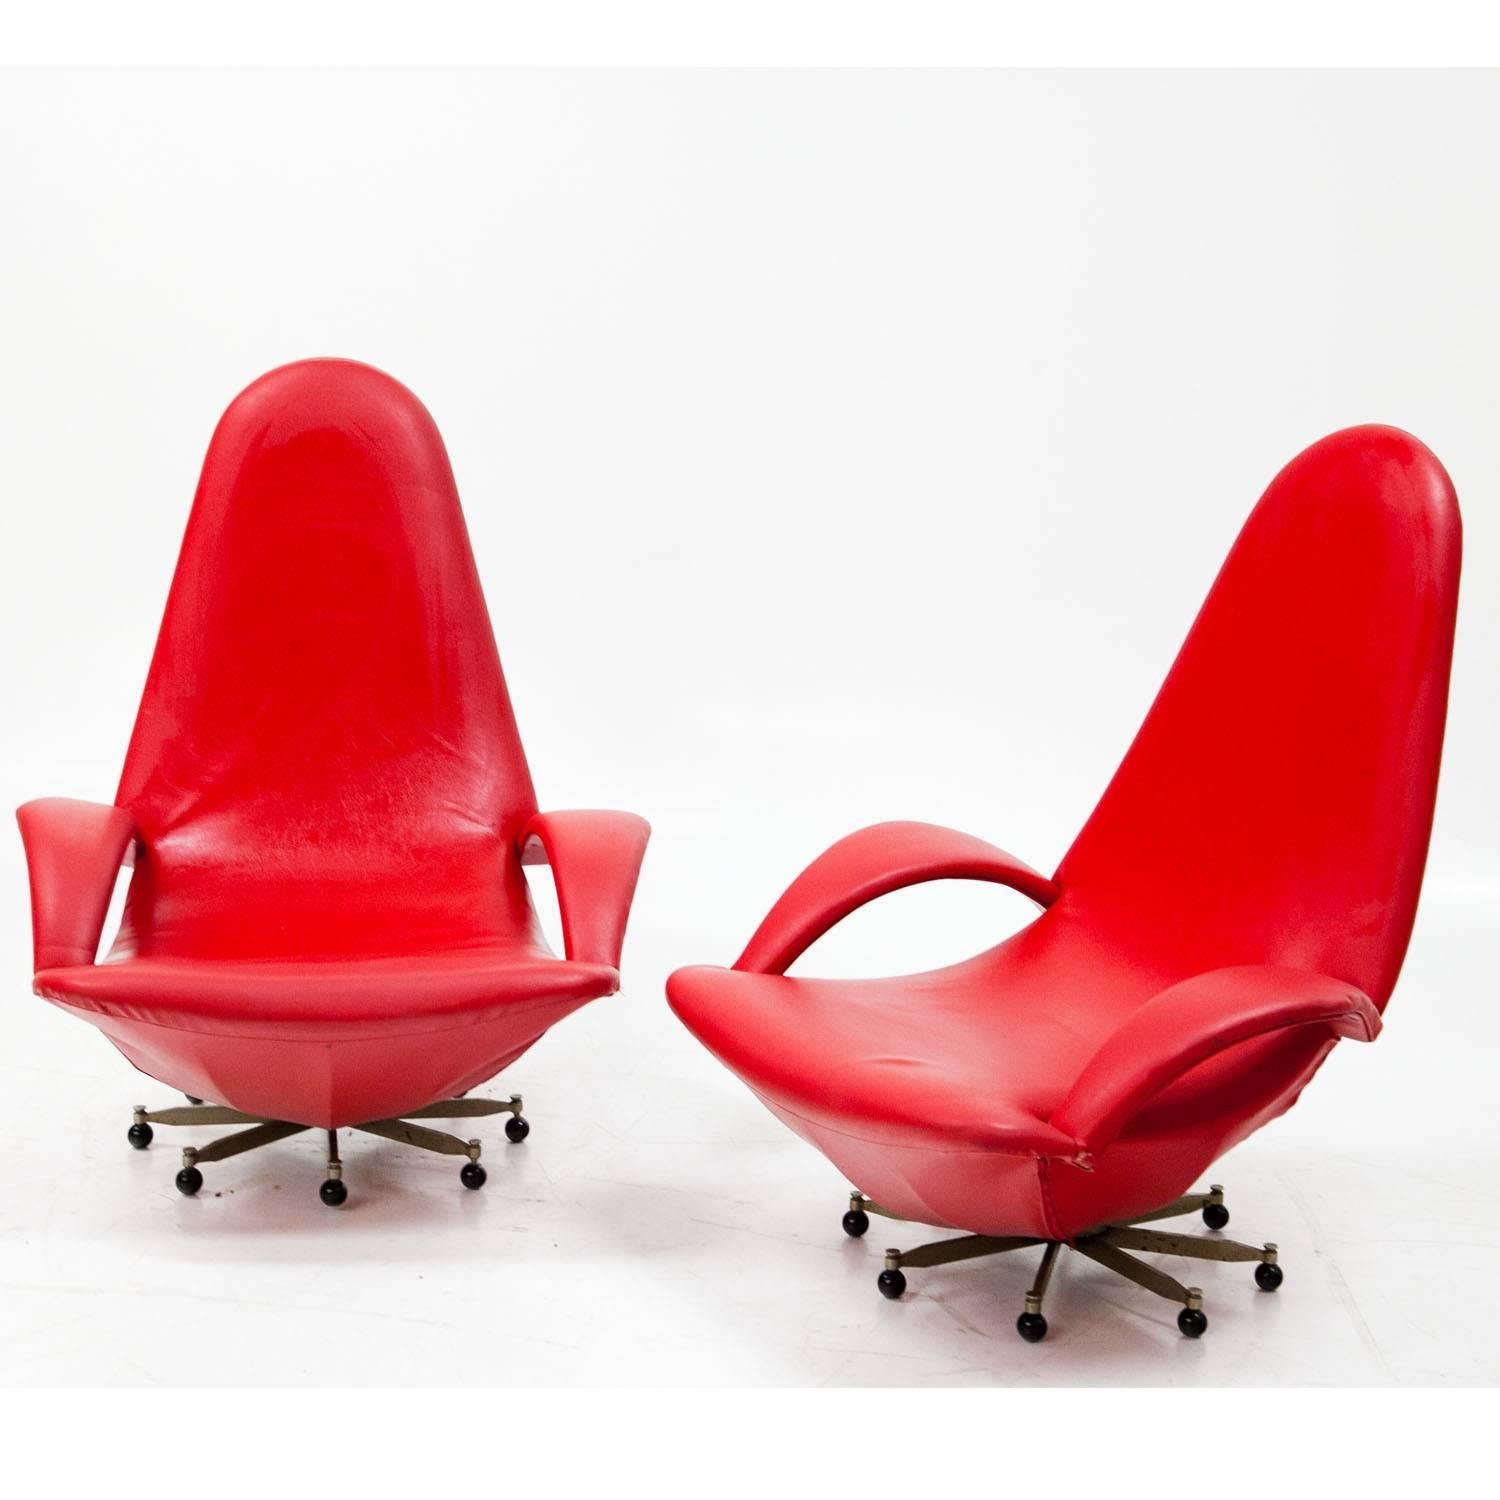 Pair of red lounge chairs, upholstered with a red faux leather. The chairs show organic forms, tall backrests and curved armrest. They stand on an eight-armed foot with black wheels.